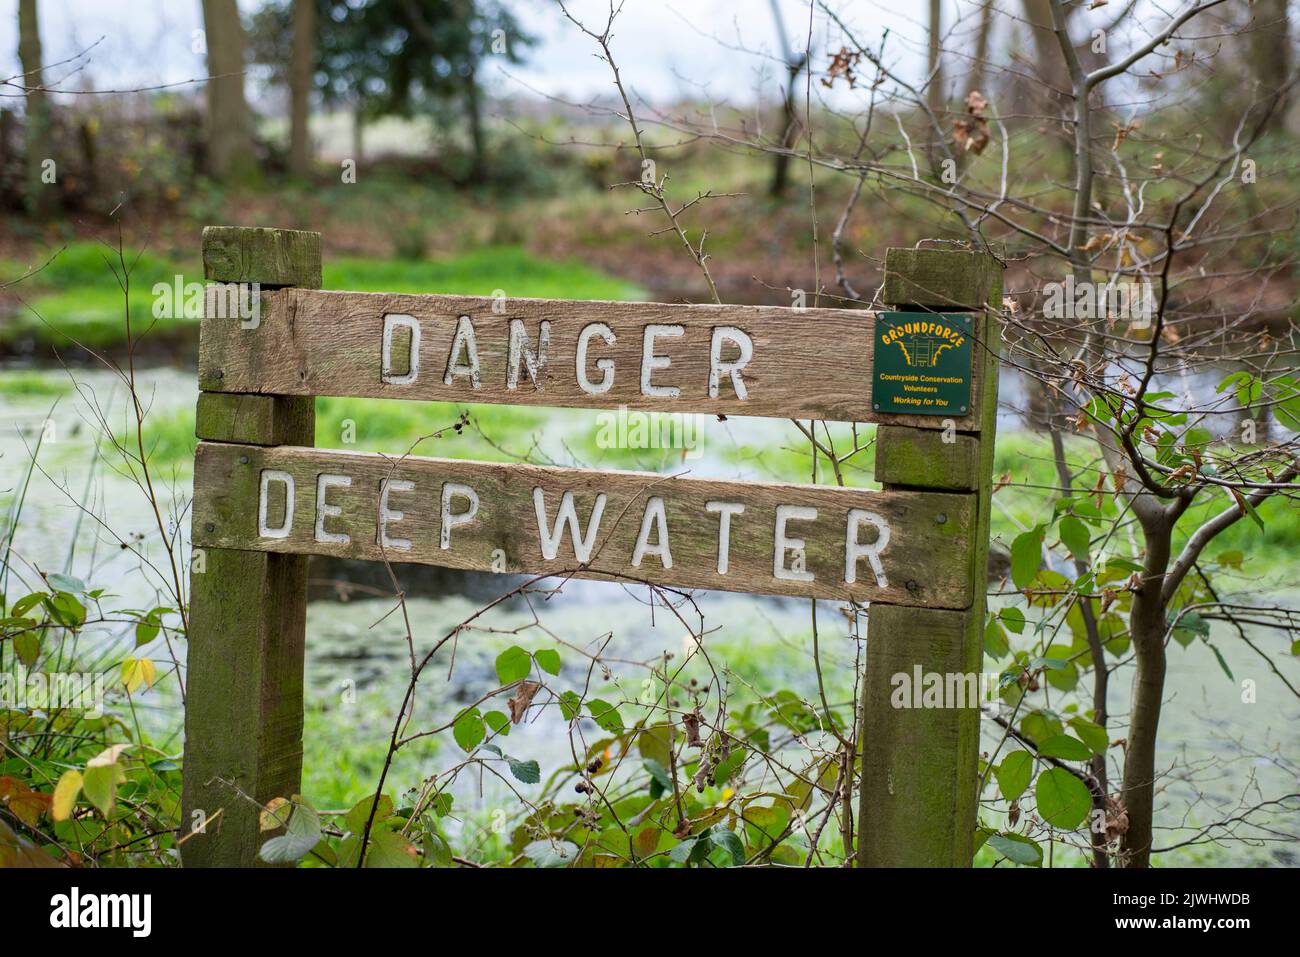 A wooden sign warns people of the danger of deep water near a small pond in a woodland area in North London in England UK Stock Photo